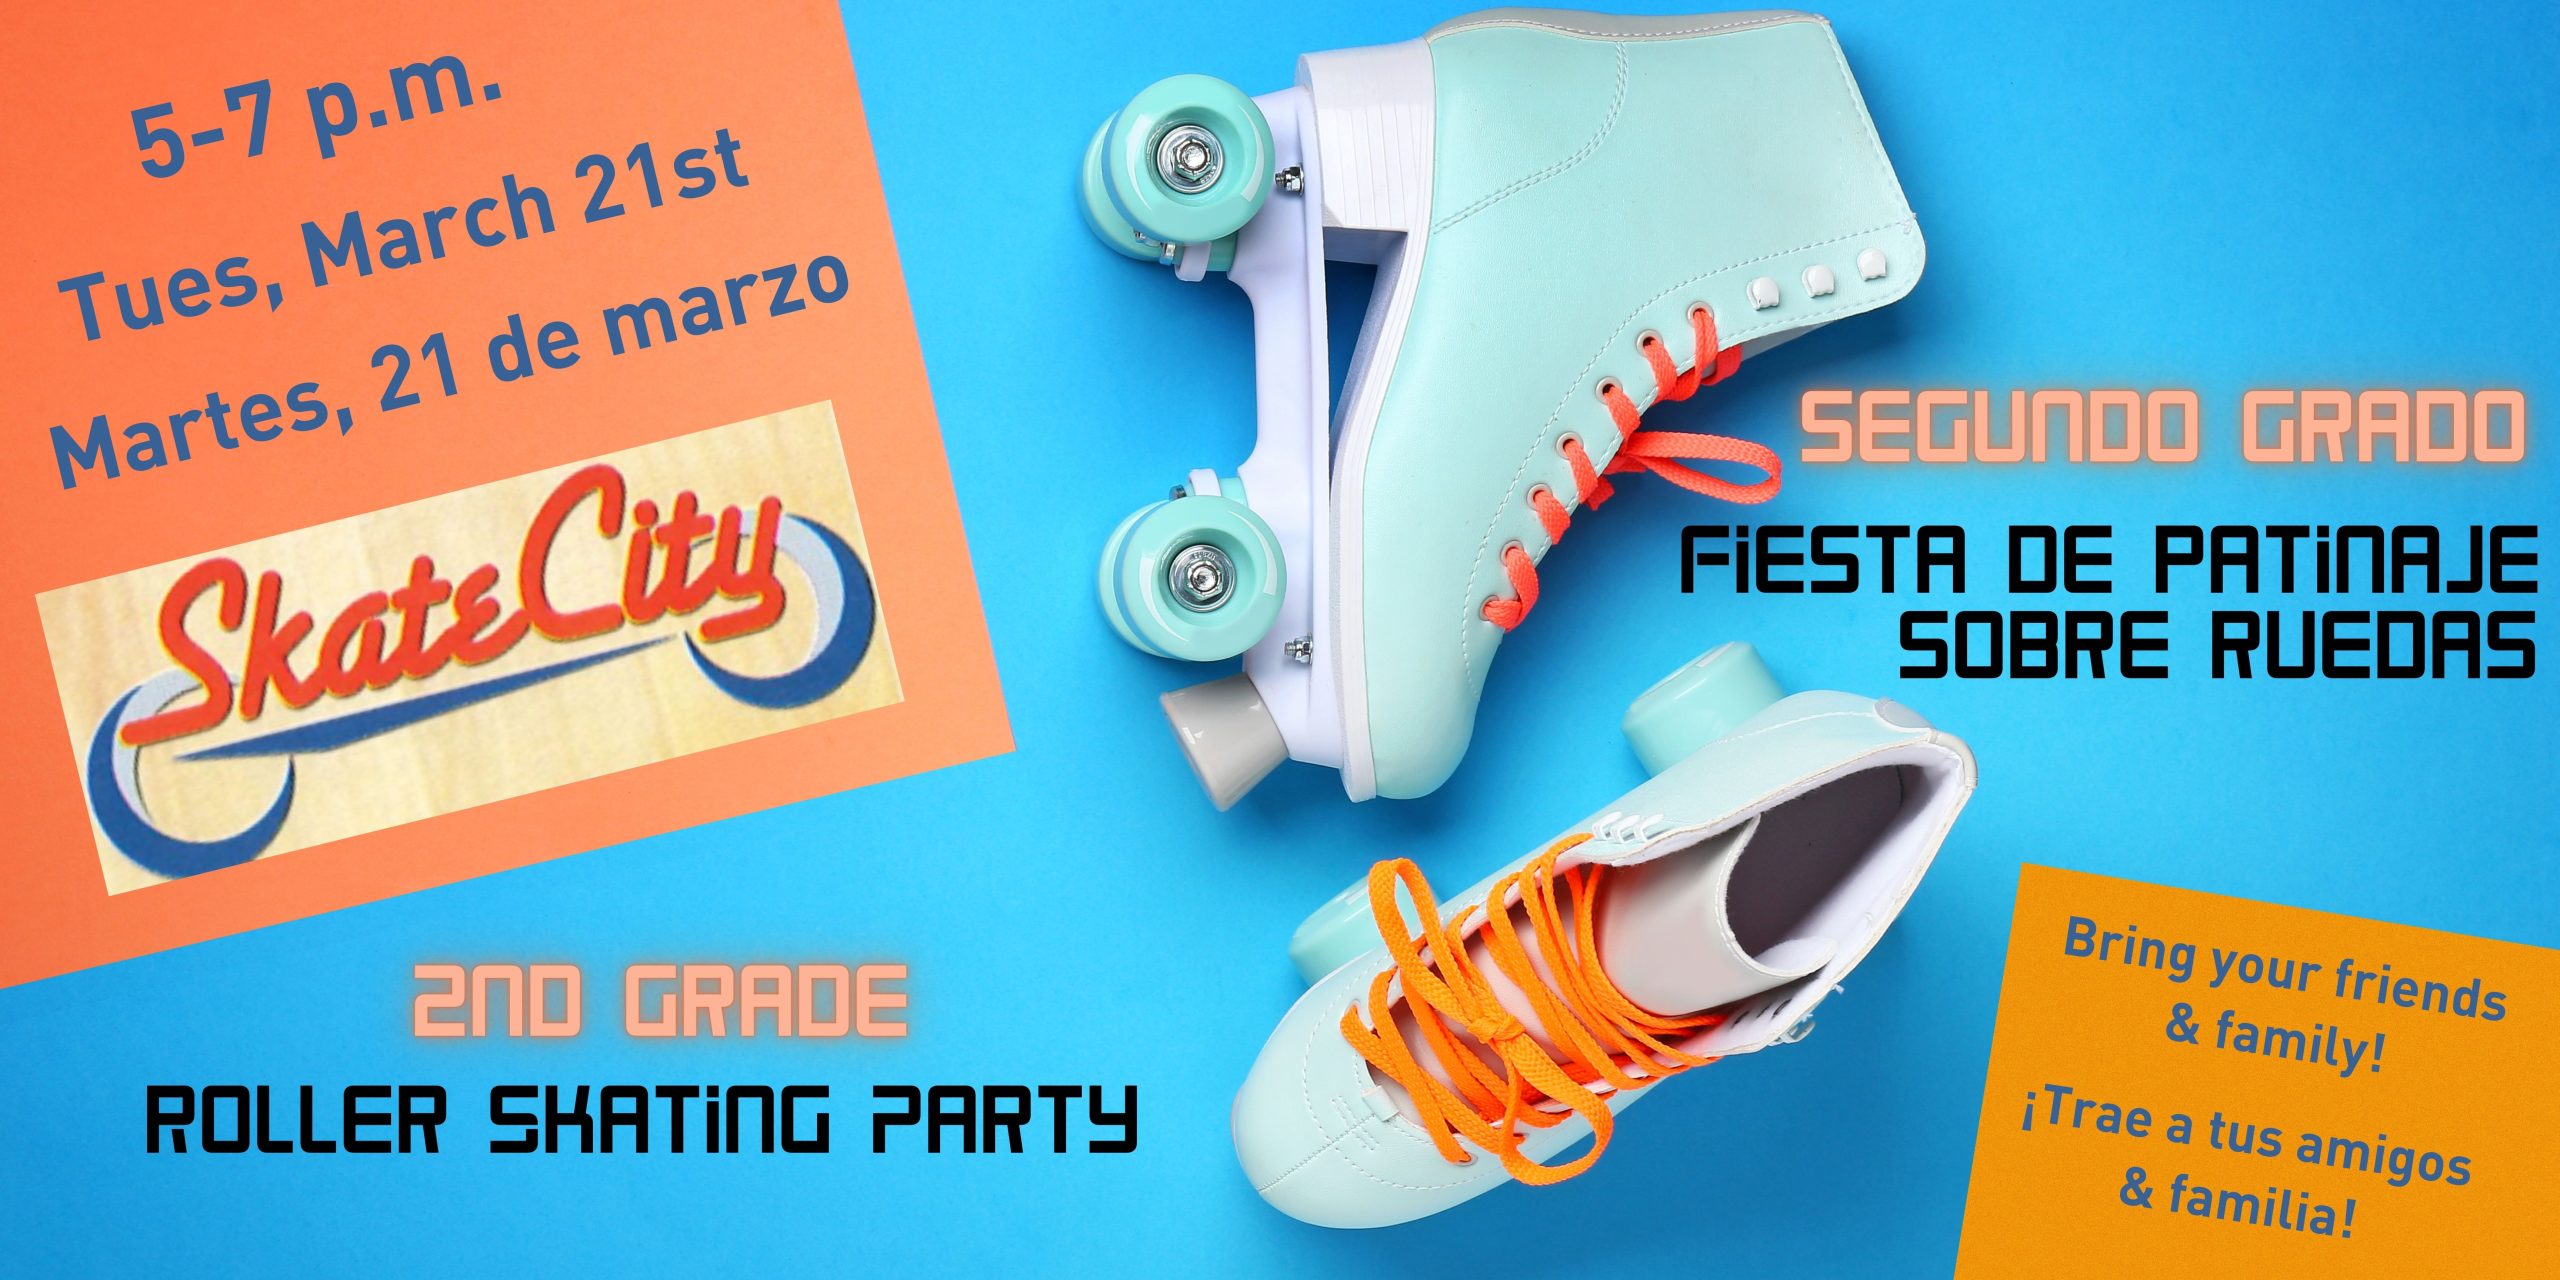 Blue background with a pair of light blue roller skates in the middle. Orange box in the upper left corner says in blue text, "5-7pm, Tuesday, March 21st, Martes, 21 de marzo" with a logo for Skate City. Bottom right corner has an orange box with blue text that says, "Bring your family & friends!" and "¡Trae a tus amigos y familia!" Orange text says, "2nd Grade and Segundo grado." Black text says, "Skating Party" and "Fiesta de Patinaje Sobre Ruedas"